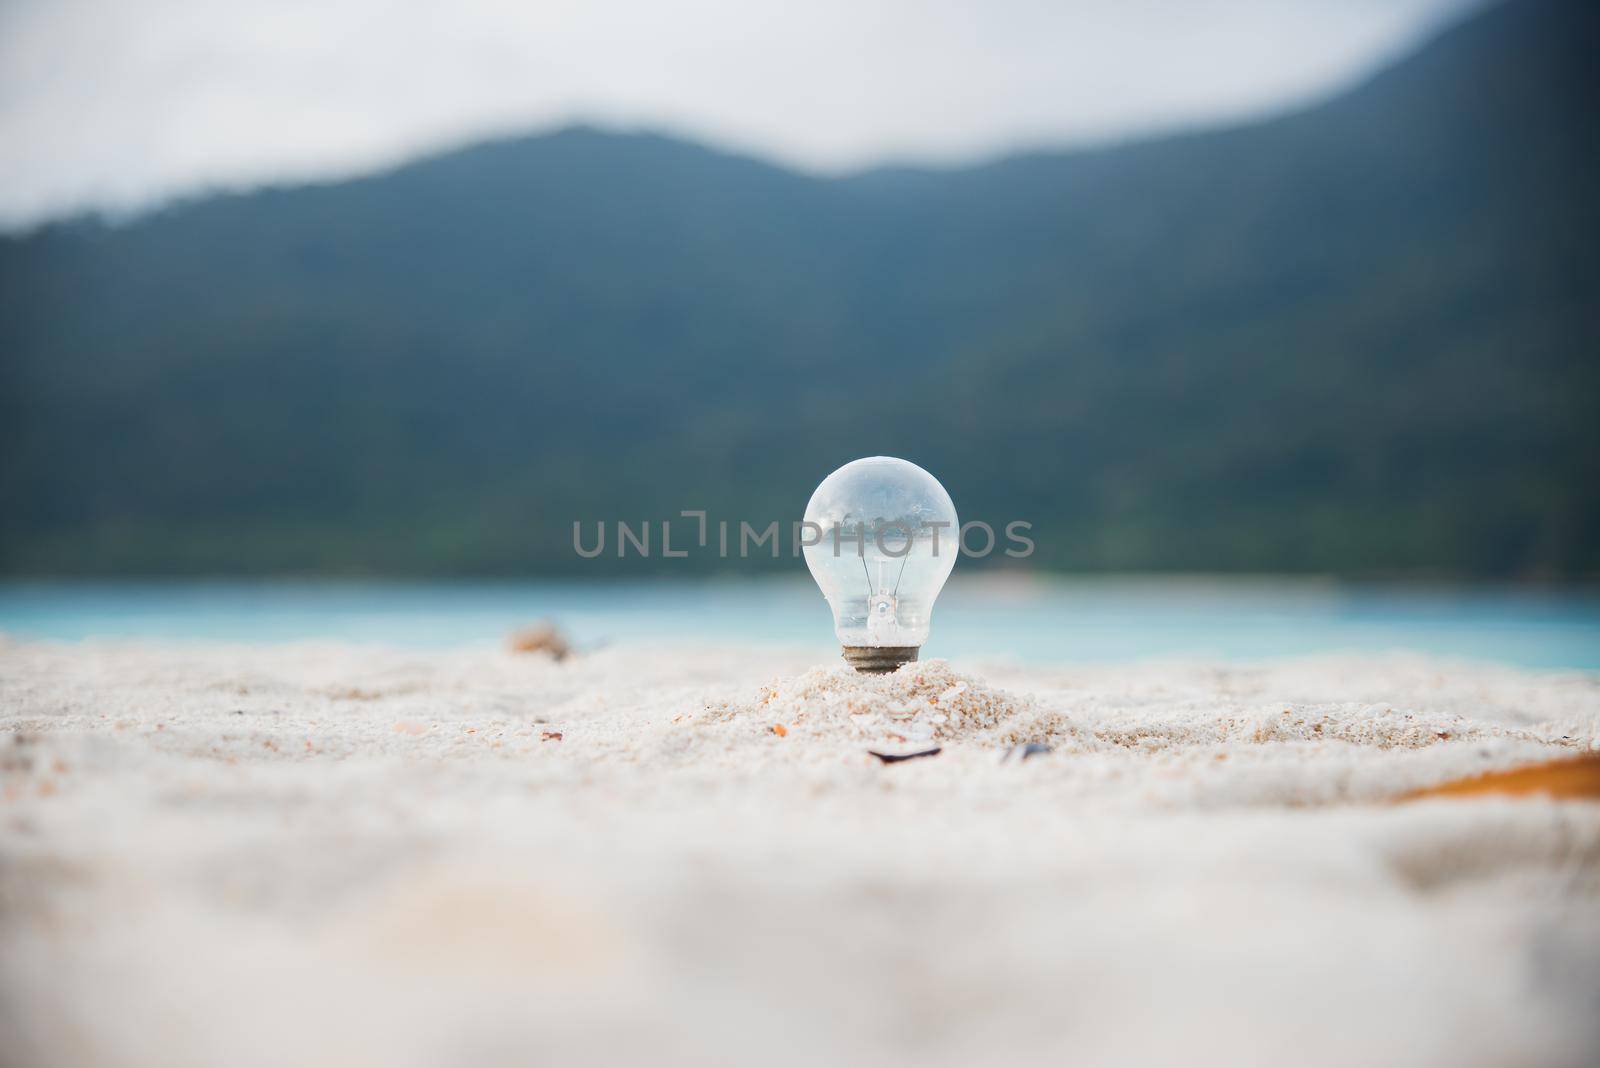 Lamp and Beach energy environment for your ideas